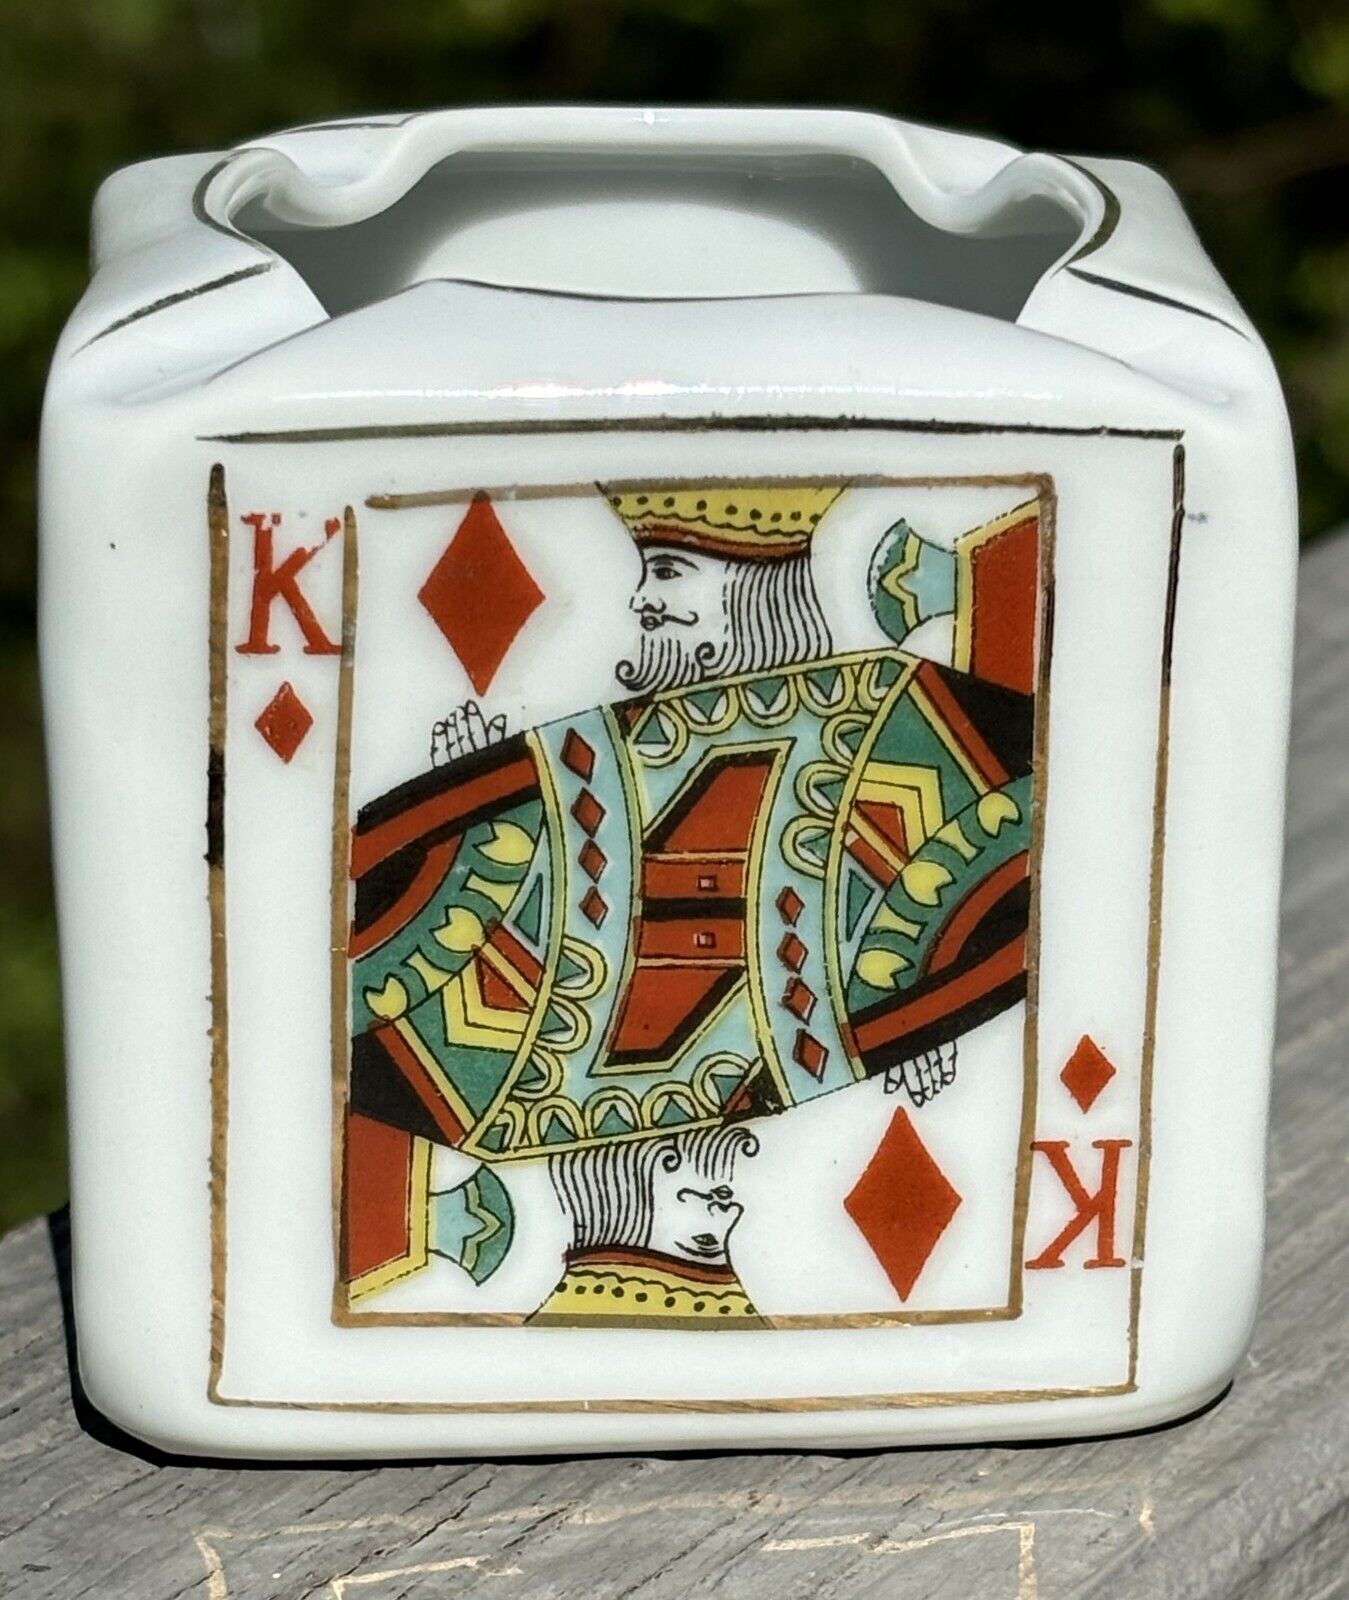 Vintage Porcelain Square Cubed Ashtray Playing Card/Poker Theme